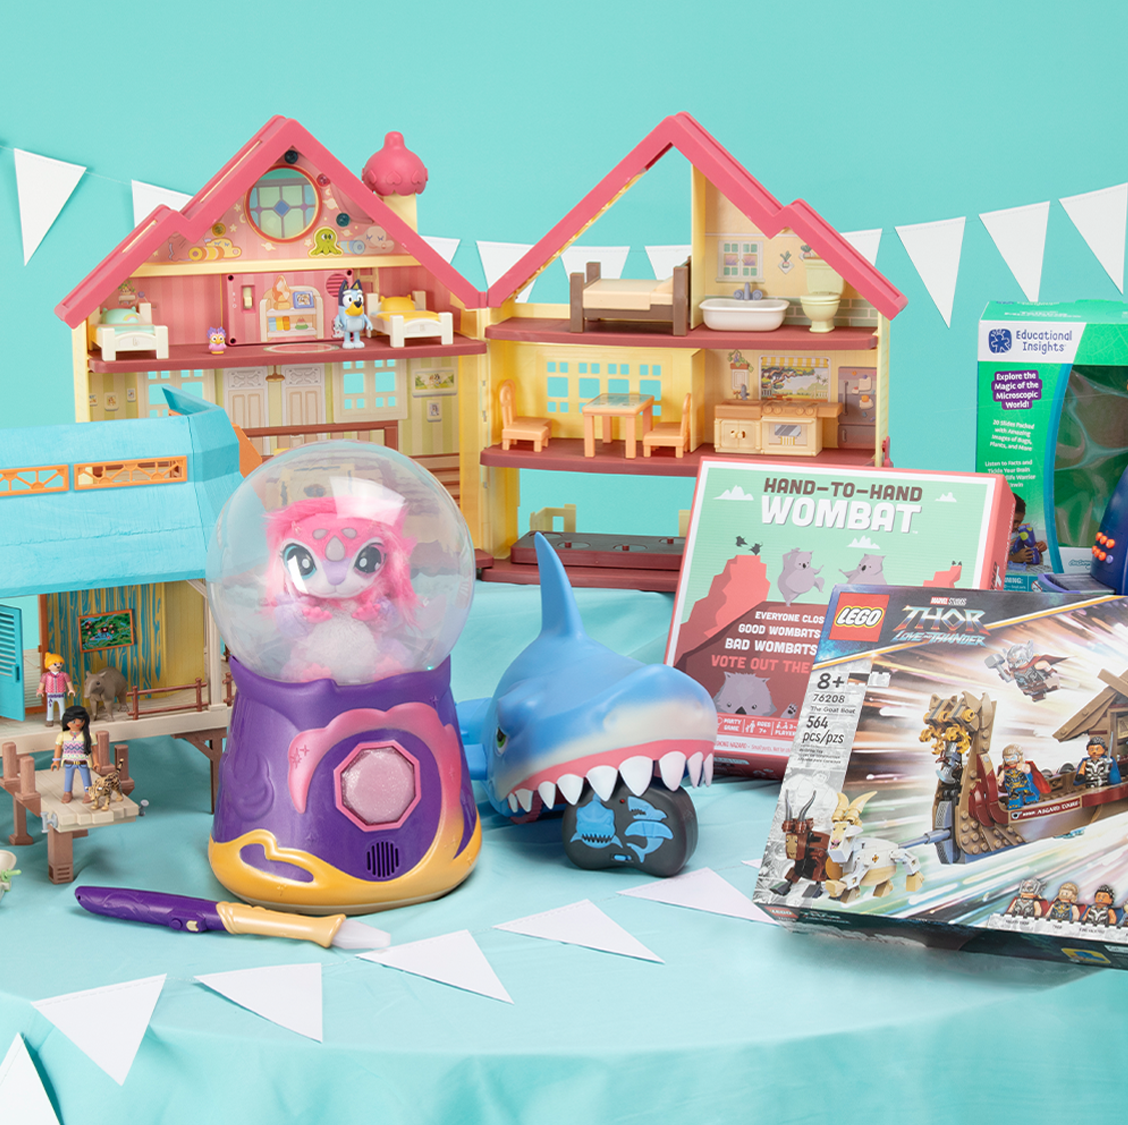 Ten Things About the Gabby's Dollhouse Franchise Strategy That